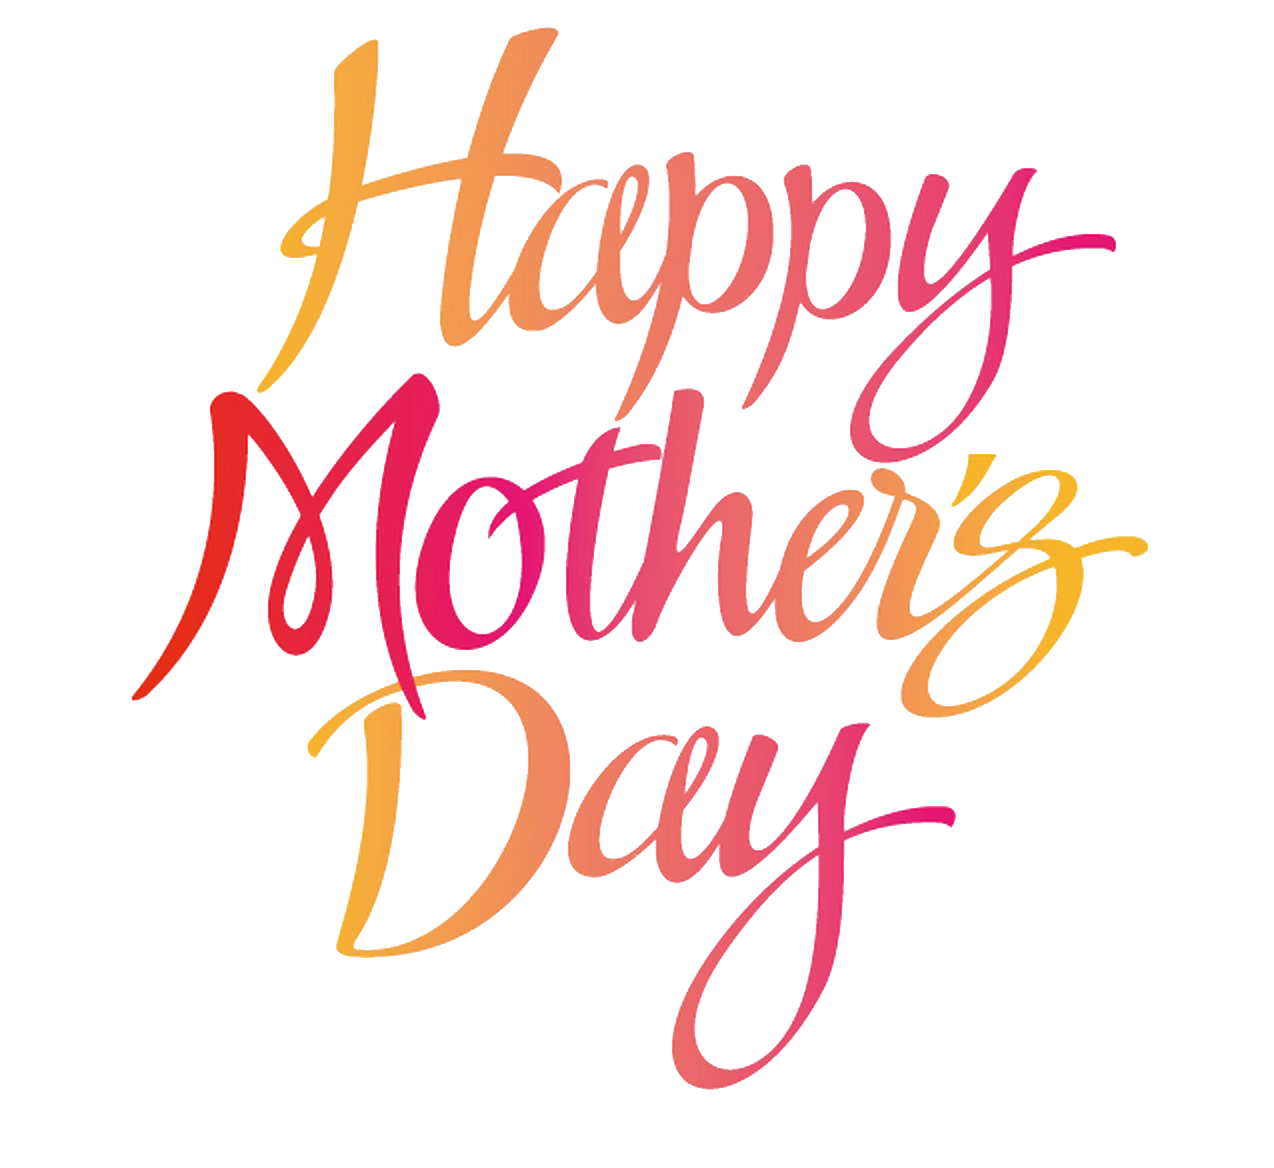 Download Picture Mothers Day Happy HQ Image Free HQ PNG Image ...